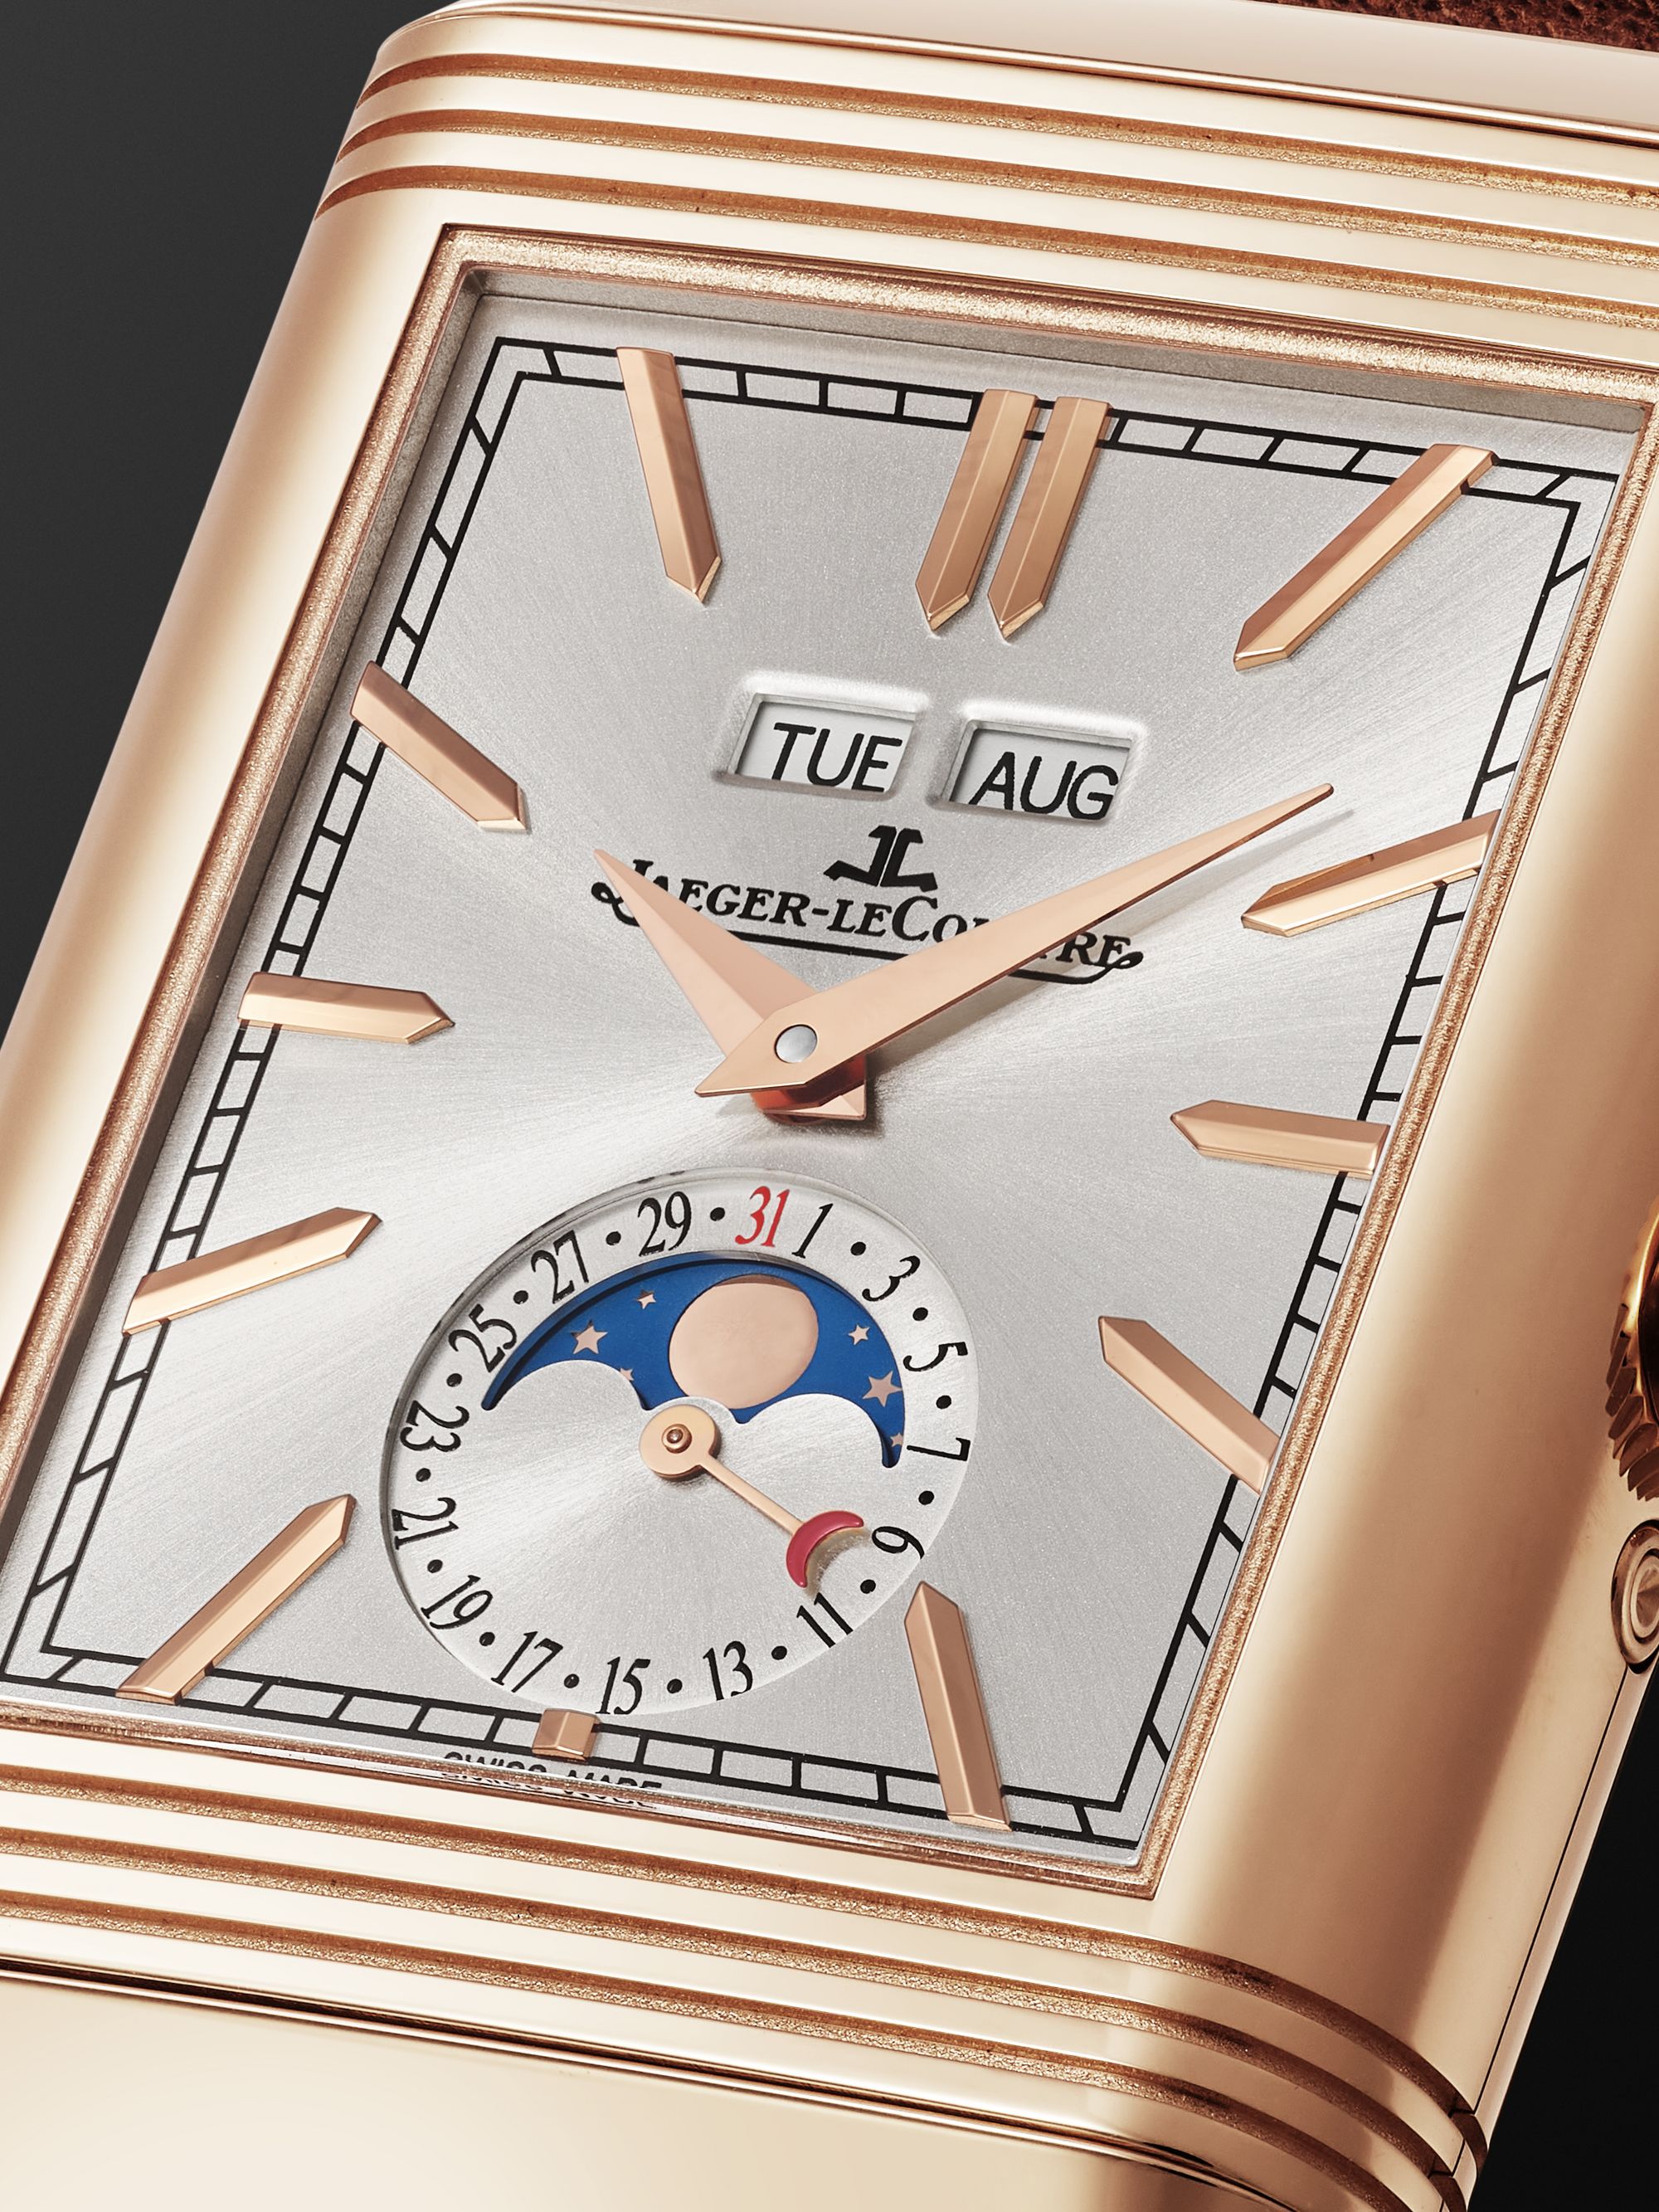 JAEGER-LECOULTRE Reverso Tribute Duoface Calendar 49.4mm x 29.9mm 18-Karat Pink Gold and Leather Watch, Ref. No Q3912530